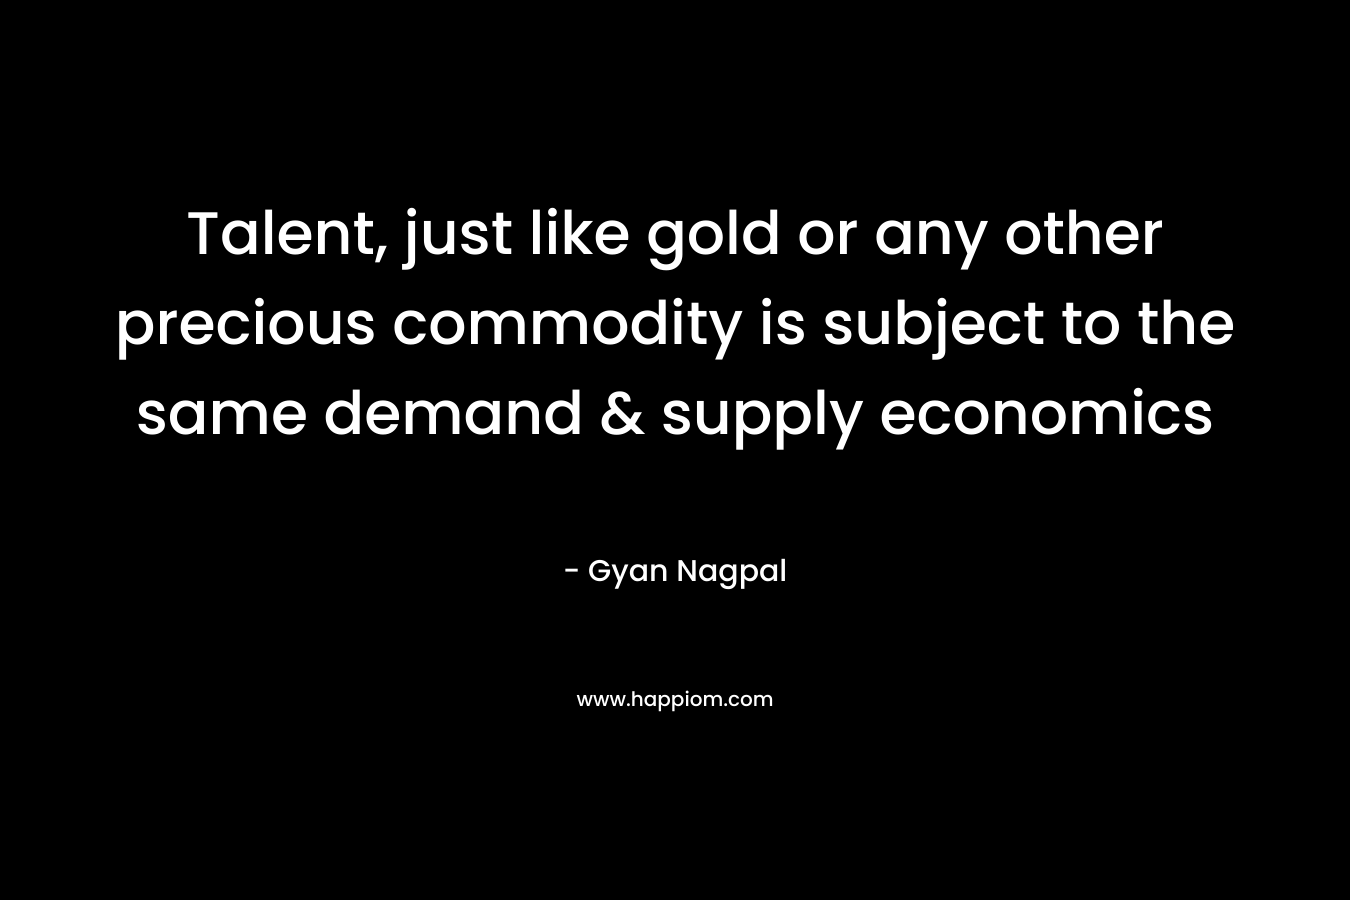 Talent, just like gold or any other precious commodity is subject to the same demand & supply economics